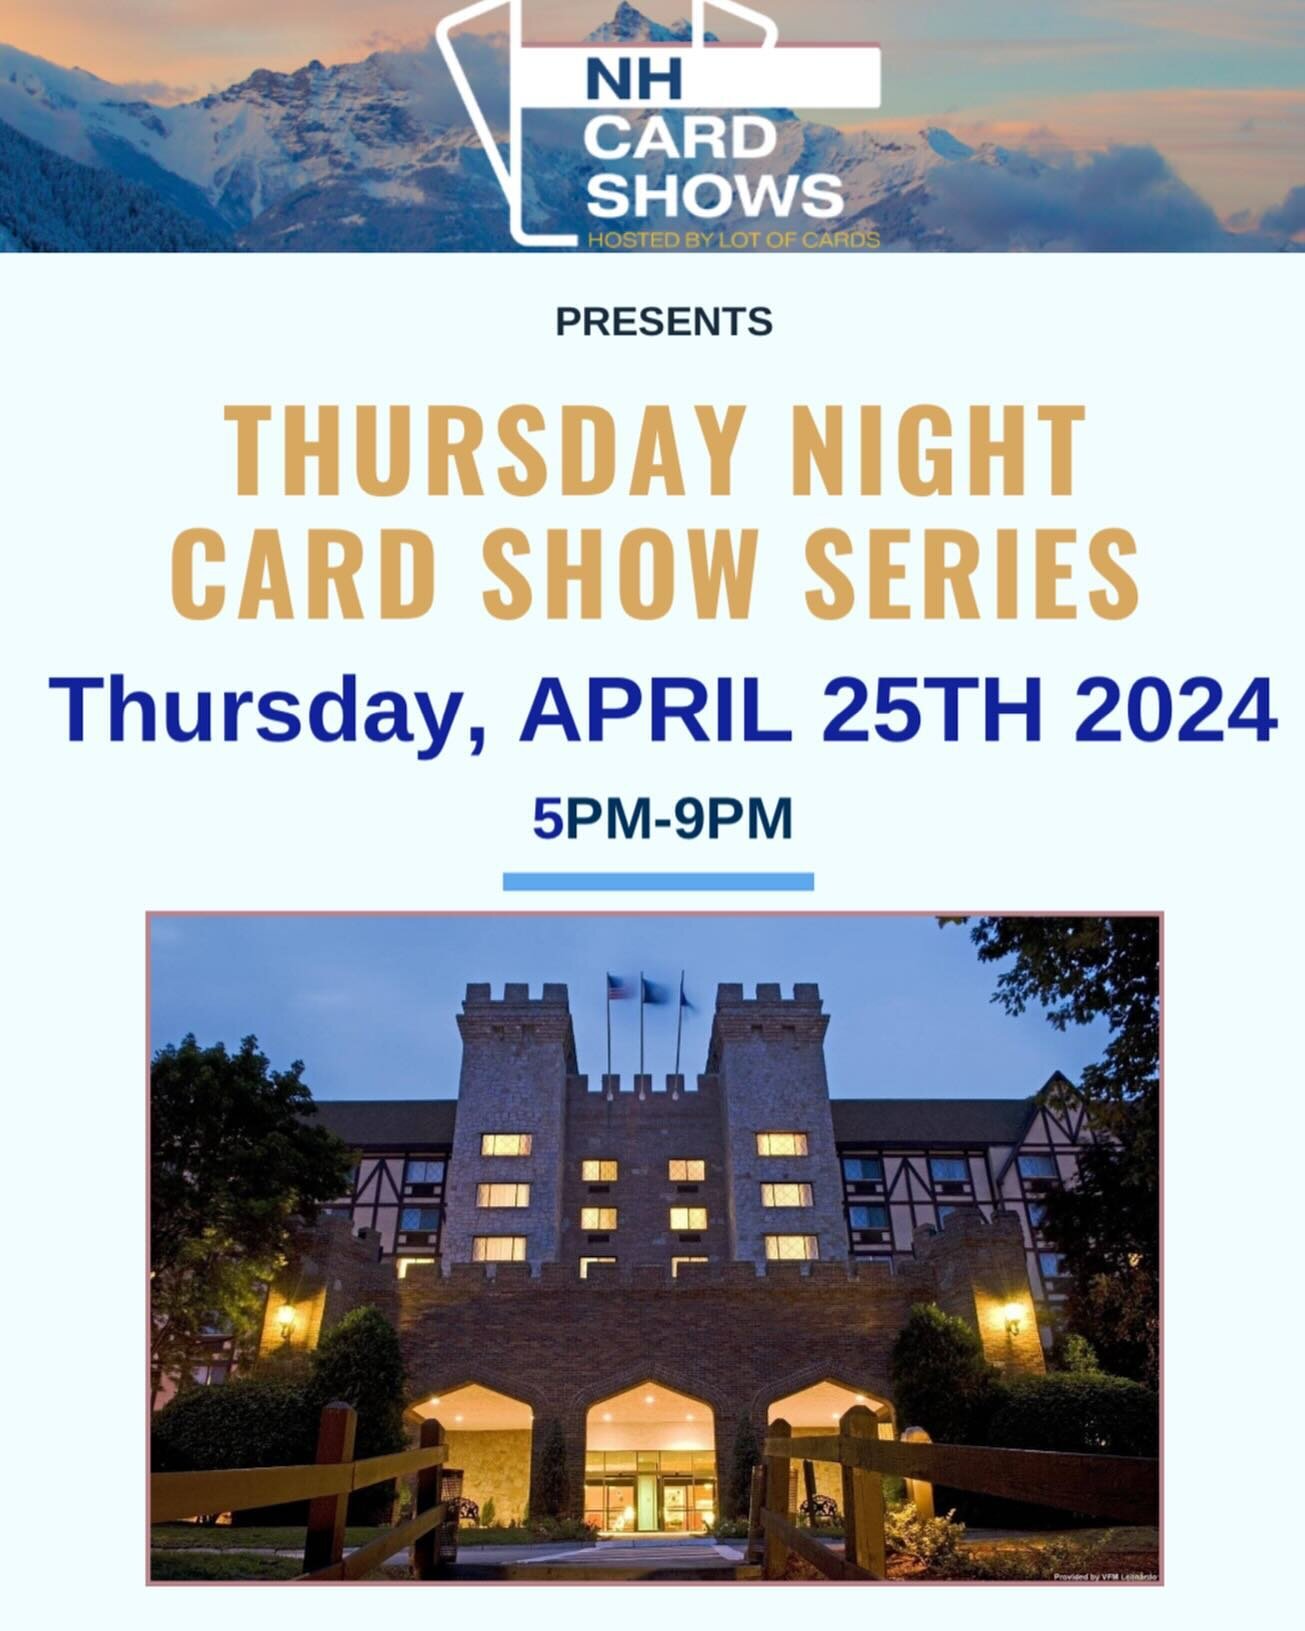 Attention all card enthusiasts! 🚨
Next Card Show is April 25th! 🎉

Our NH Card Shows promise endless excitement in the realm of cards. Whether you&rsquo;re a Pok&eacute;mon aficionado or a dedicated sports card enthusiast, this is a day you won&rsq